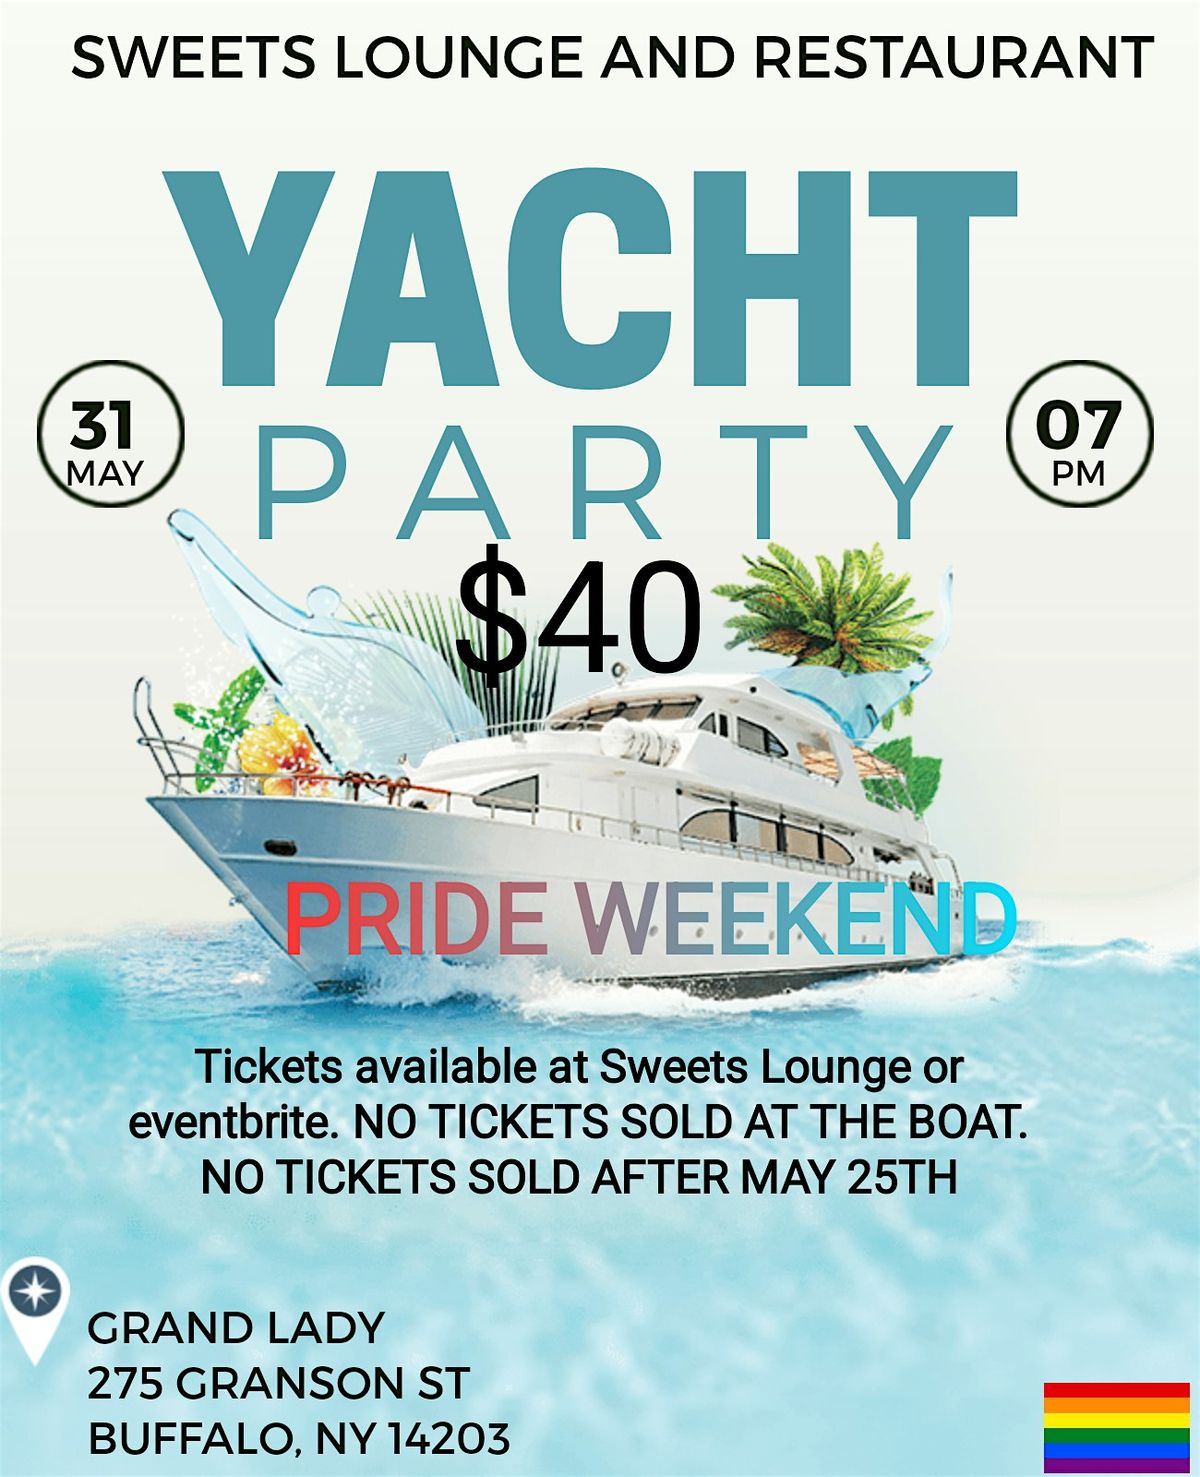 Sweets Lounge and Restaurant Yacht Party